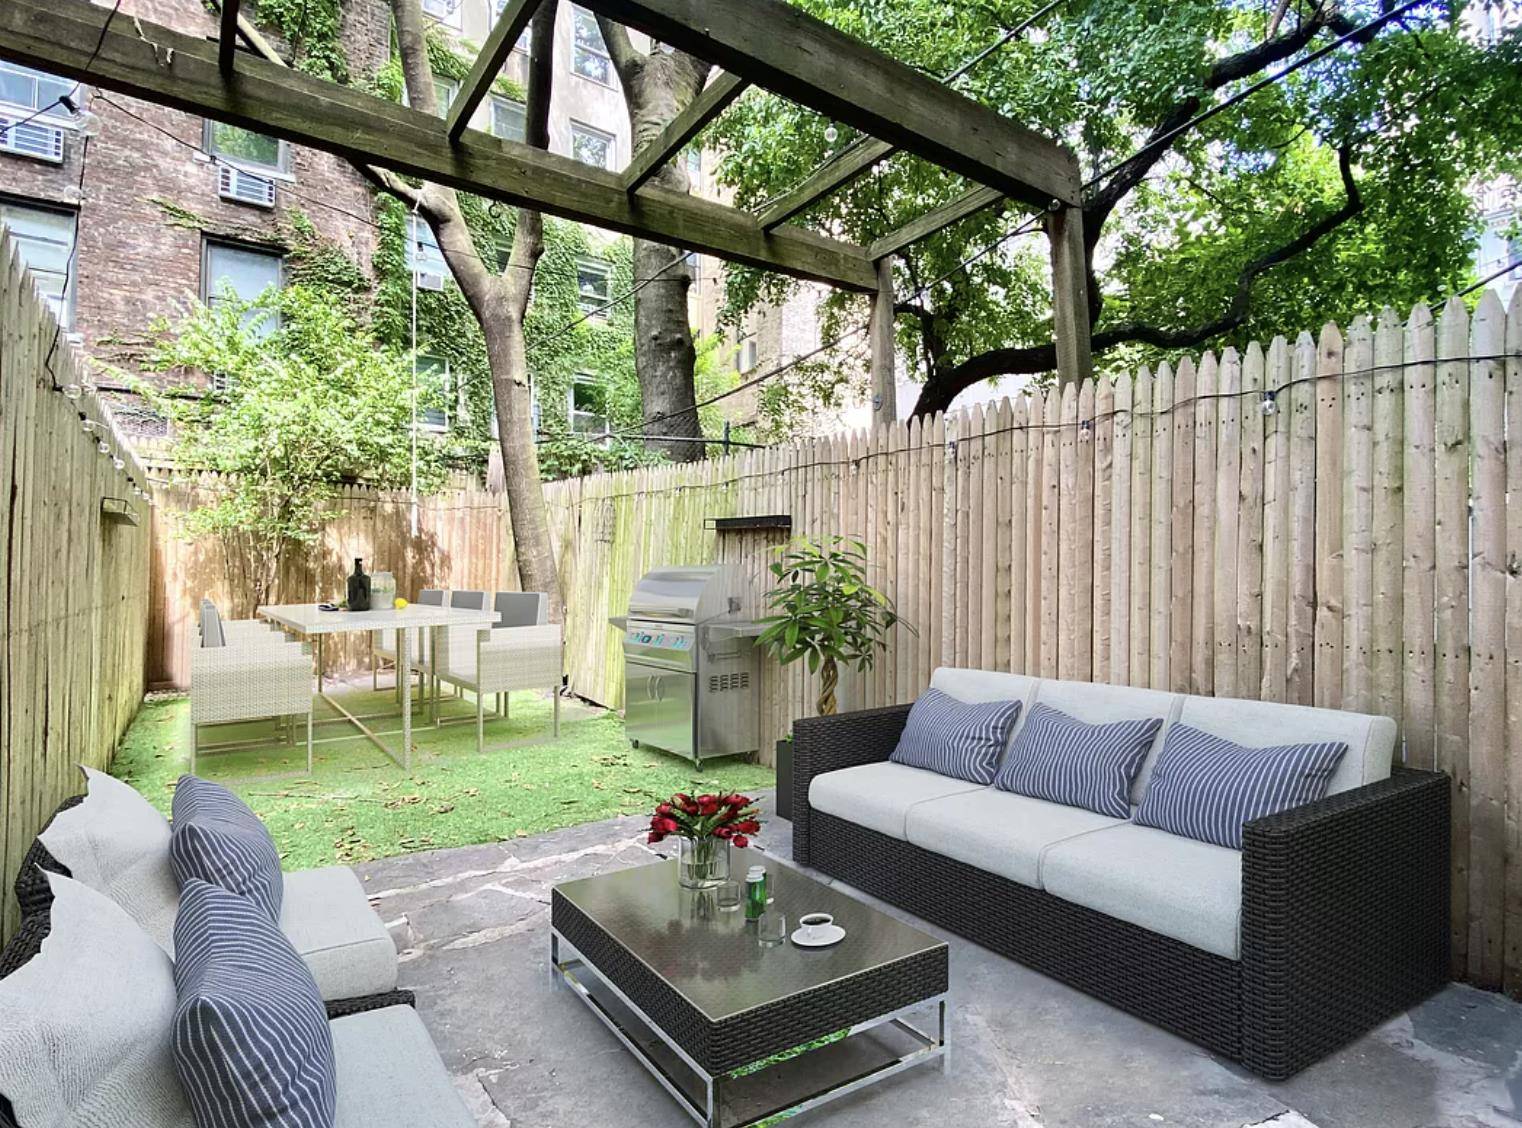 Newly Renovated Studio With Large Private Backyard, Now Available, One Month Free No Fee !